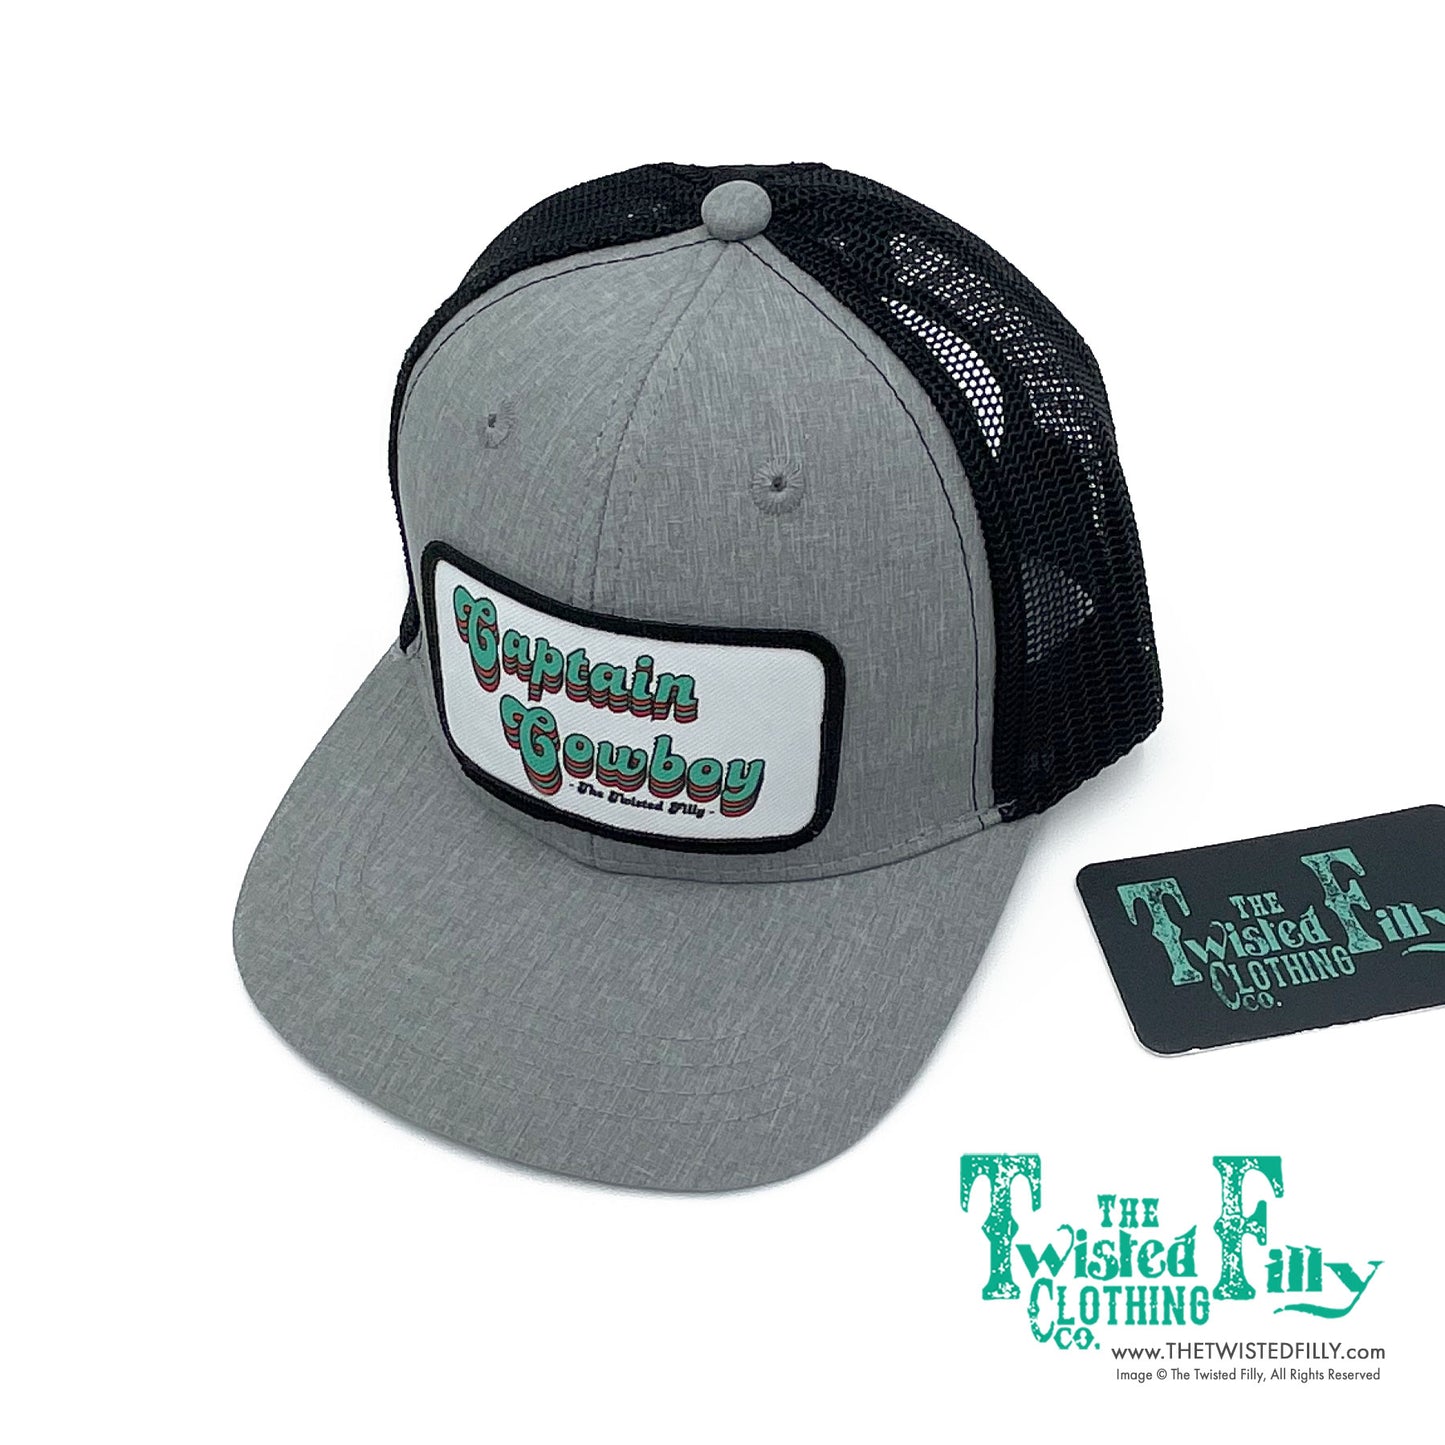 Captain Cowboy - Youth / Adult Trucker Hat - Heather Gray/Black